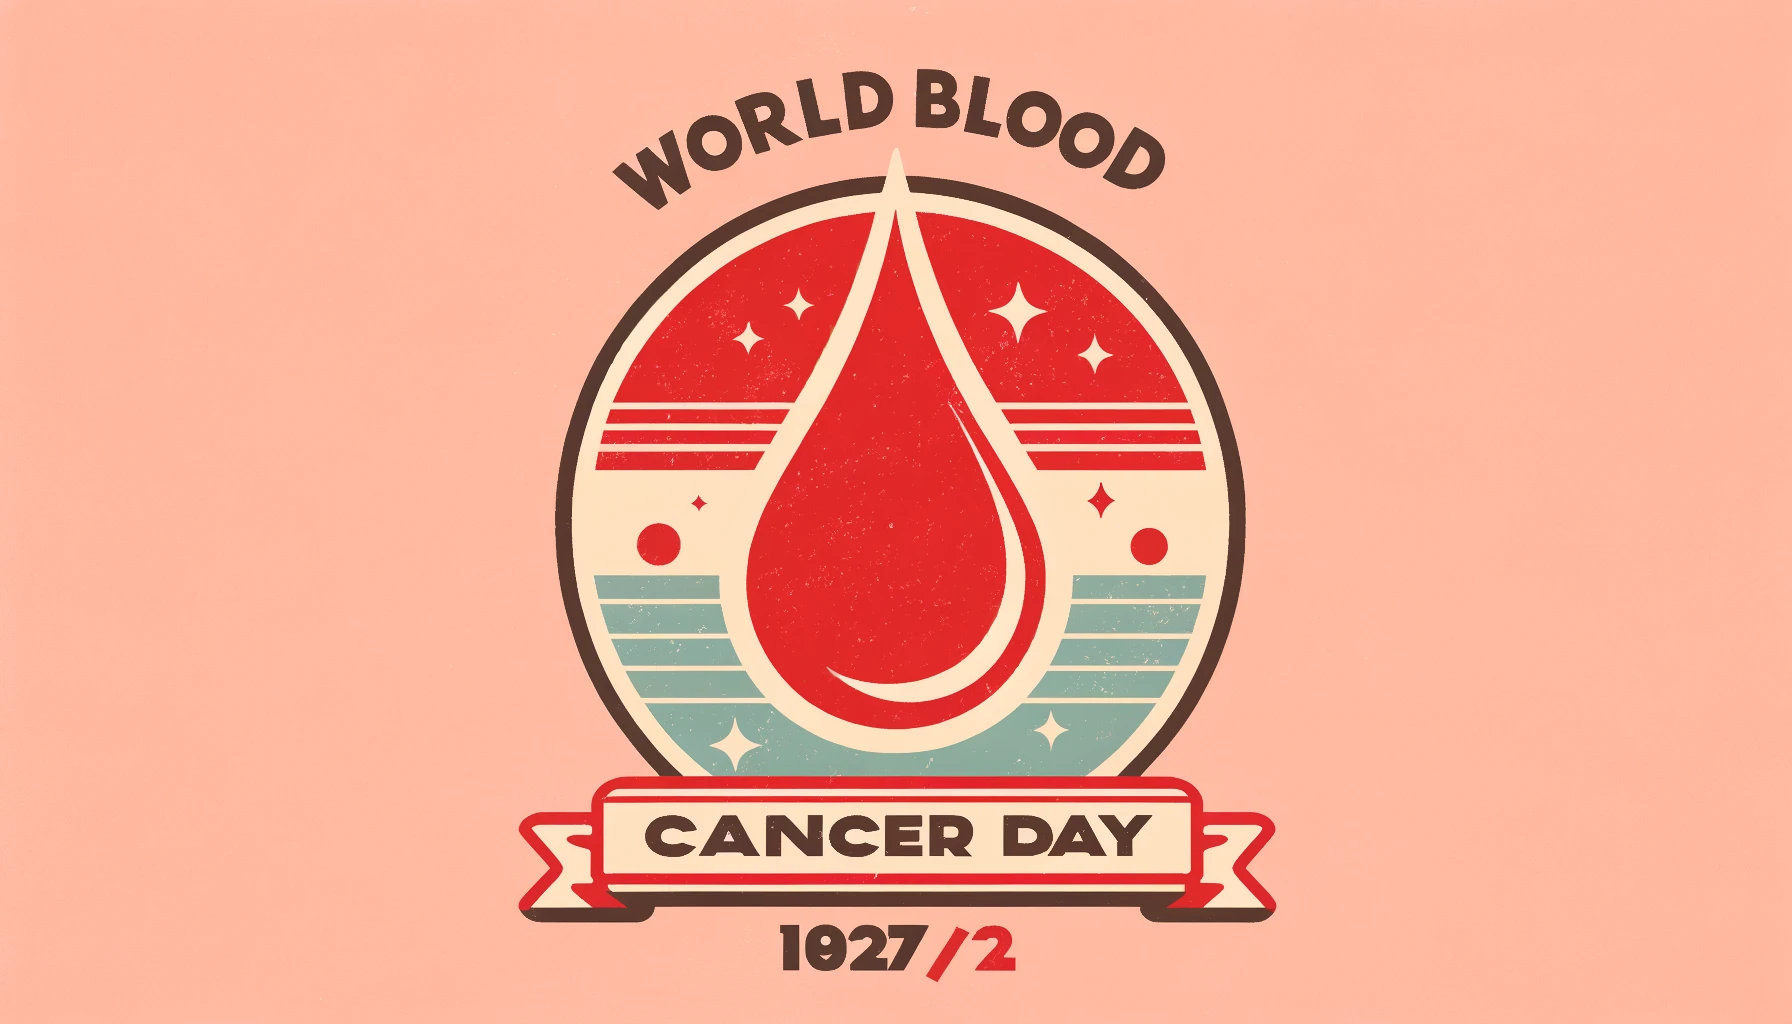 Encouraging World Blood Cancer Day Greetings for Survivors